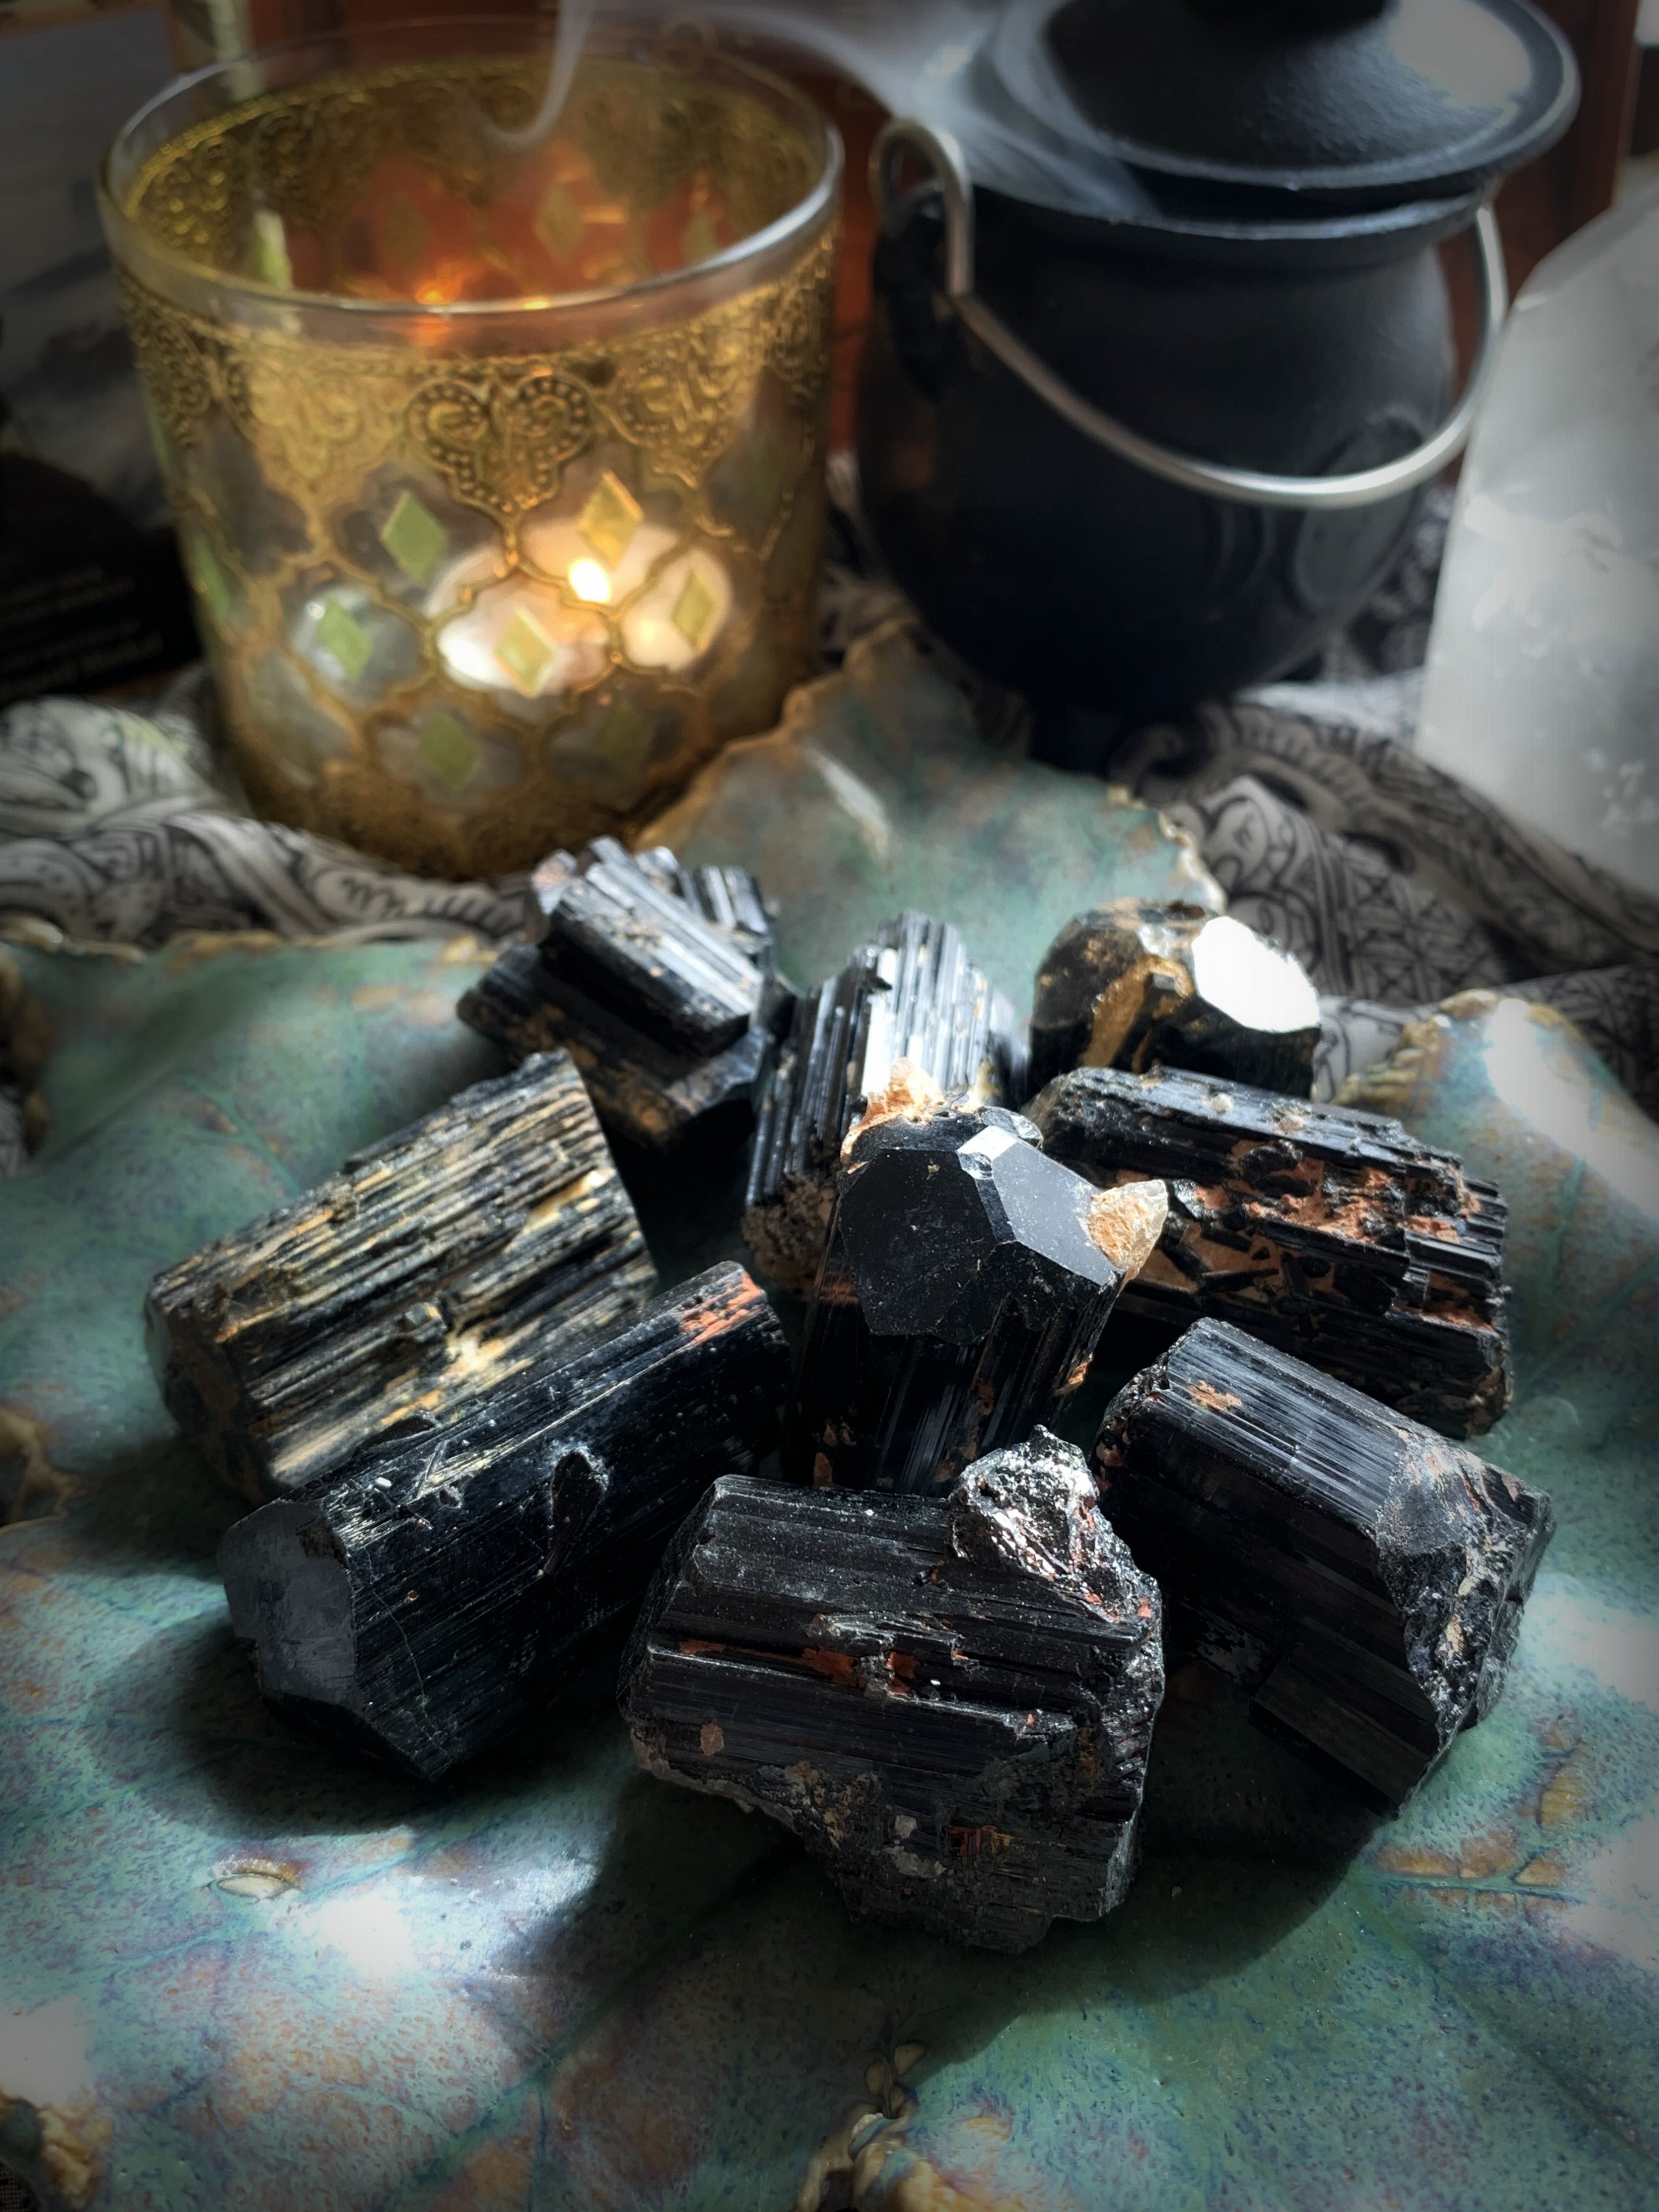 BLACK TOURMALINE ~ For Grounding Spiritual Energy and Transmuting Negative Thought Patterns